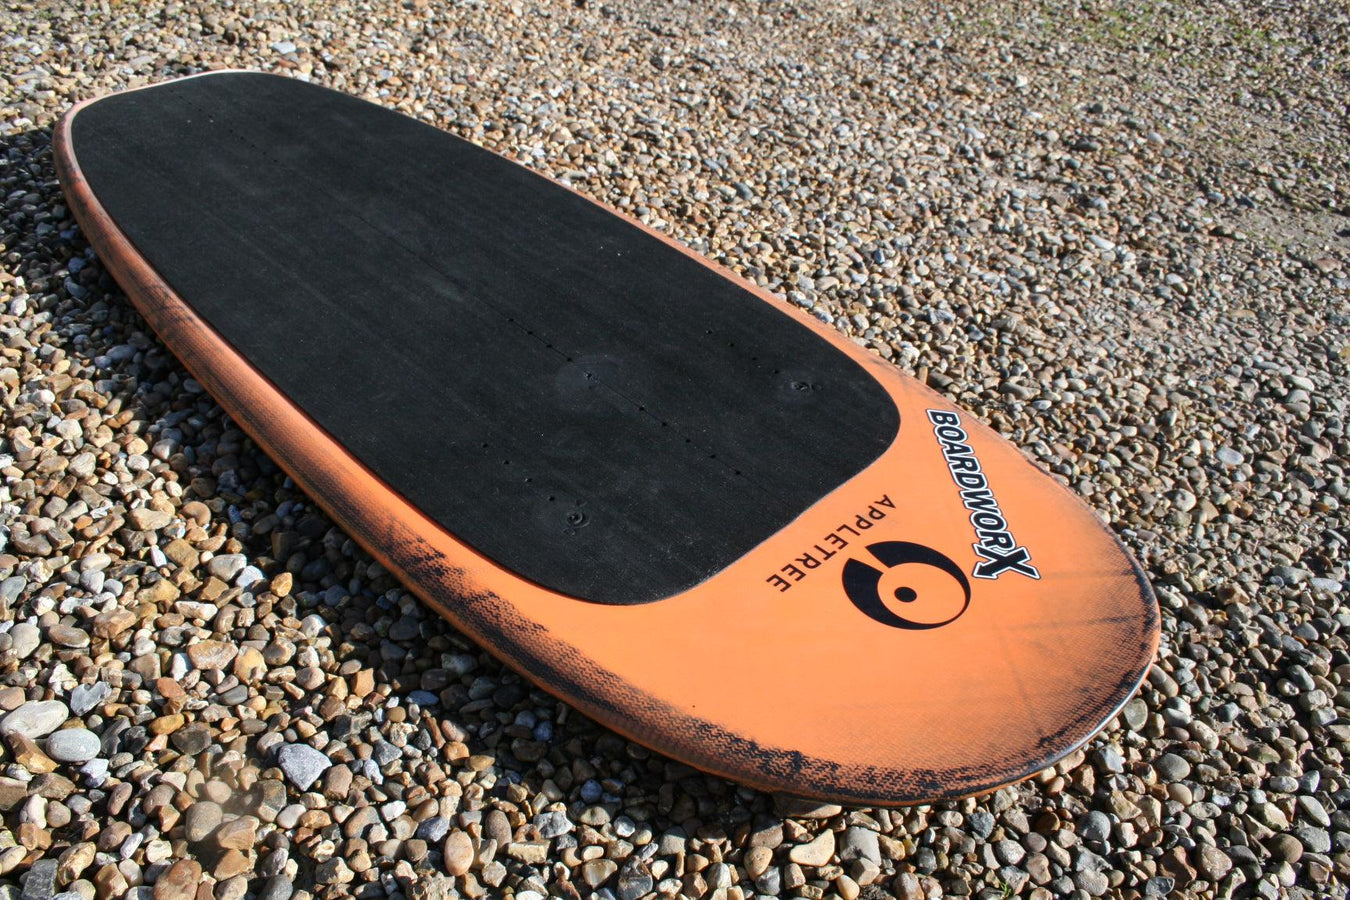 Second hand and used kitesurfing Gear